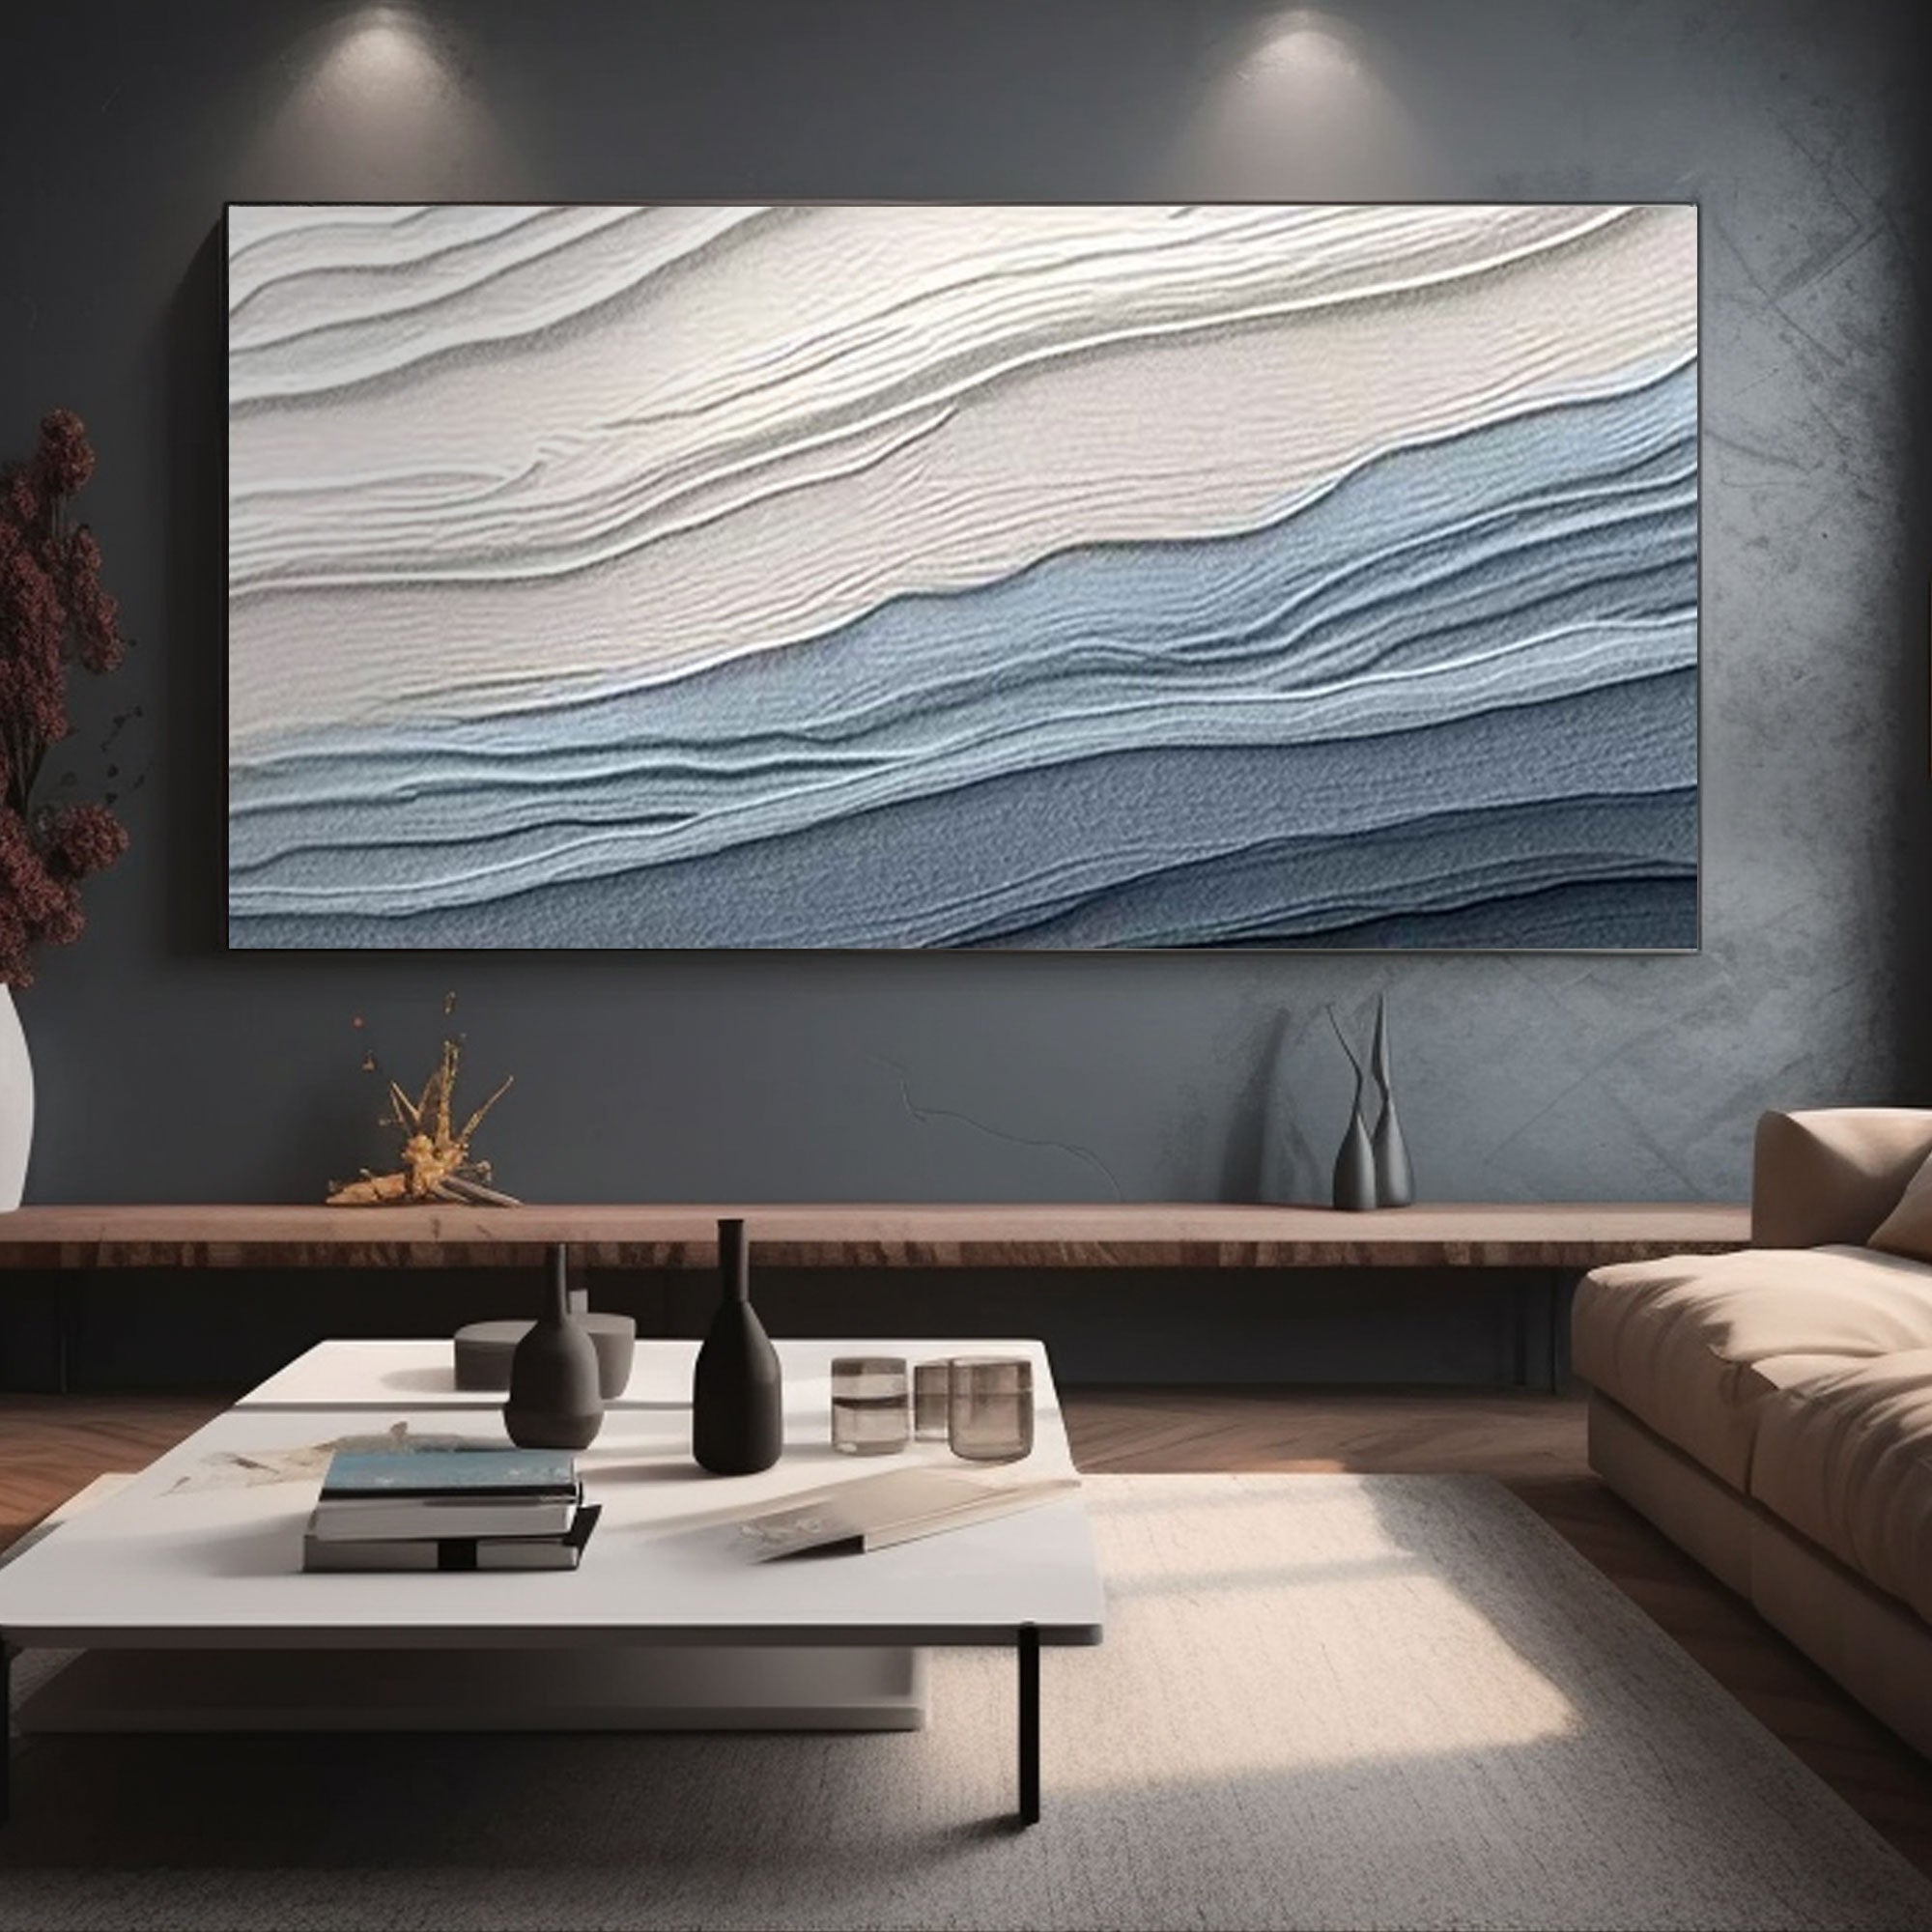 Plaster Painting "Serenity Waves"